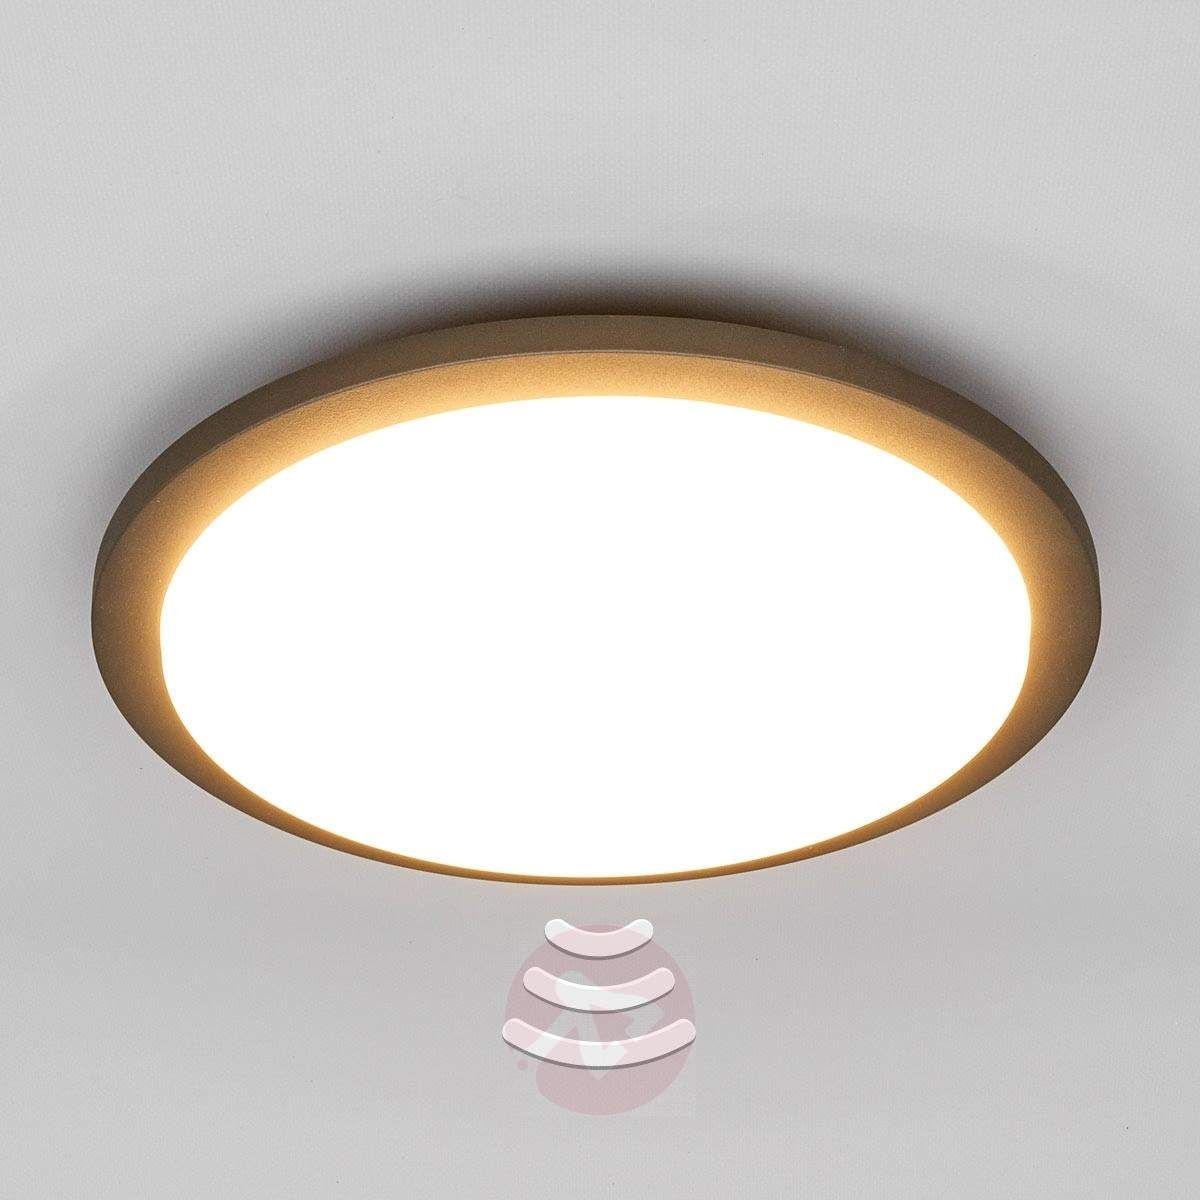 Benton – Led Outdoor Ceiling Light With Sensor | Lights.co (View 9 of 15)